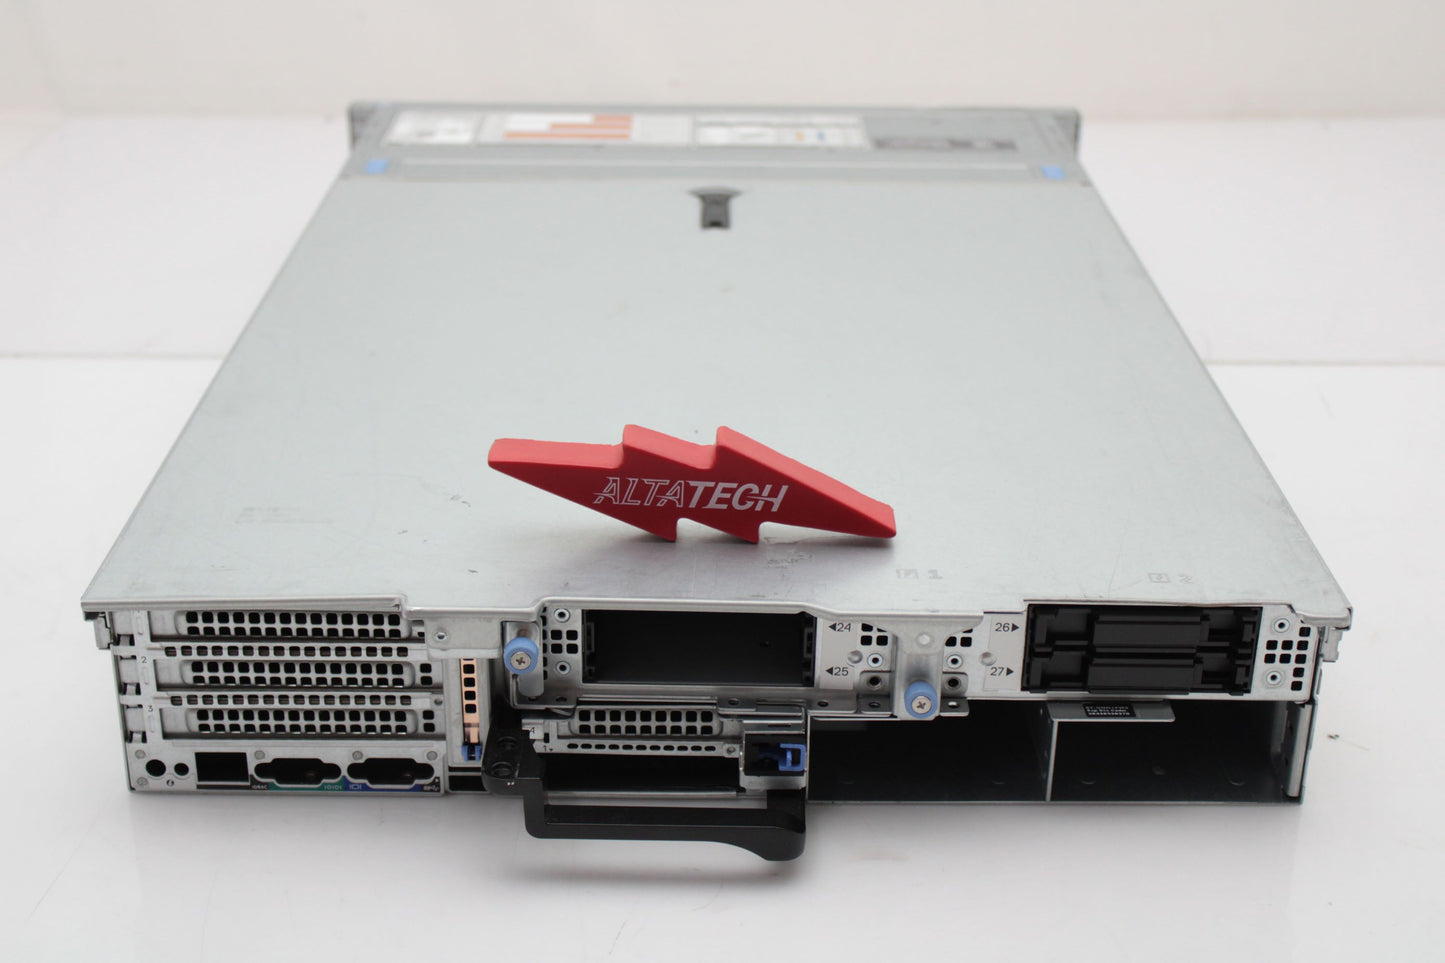 Dell PER740XD-2.5-24HDD_CTO_Base PowerEdge R740xd 24x SFF Bay Configure-to-Order Server w/ Rails, Powers, etc., Used